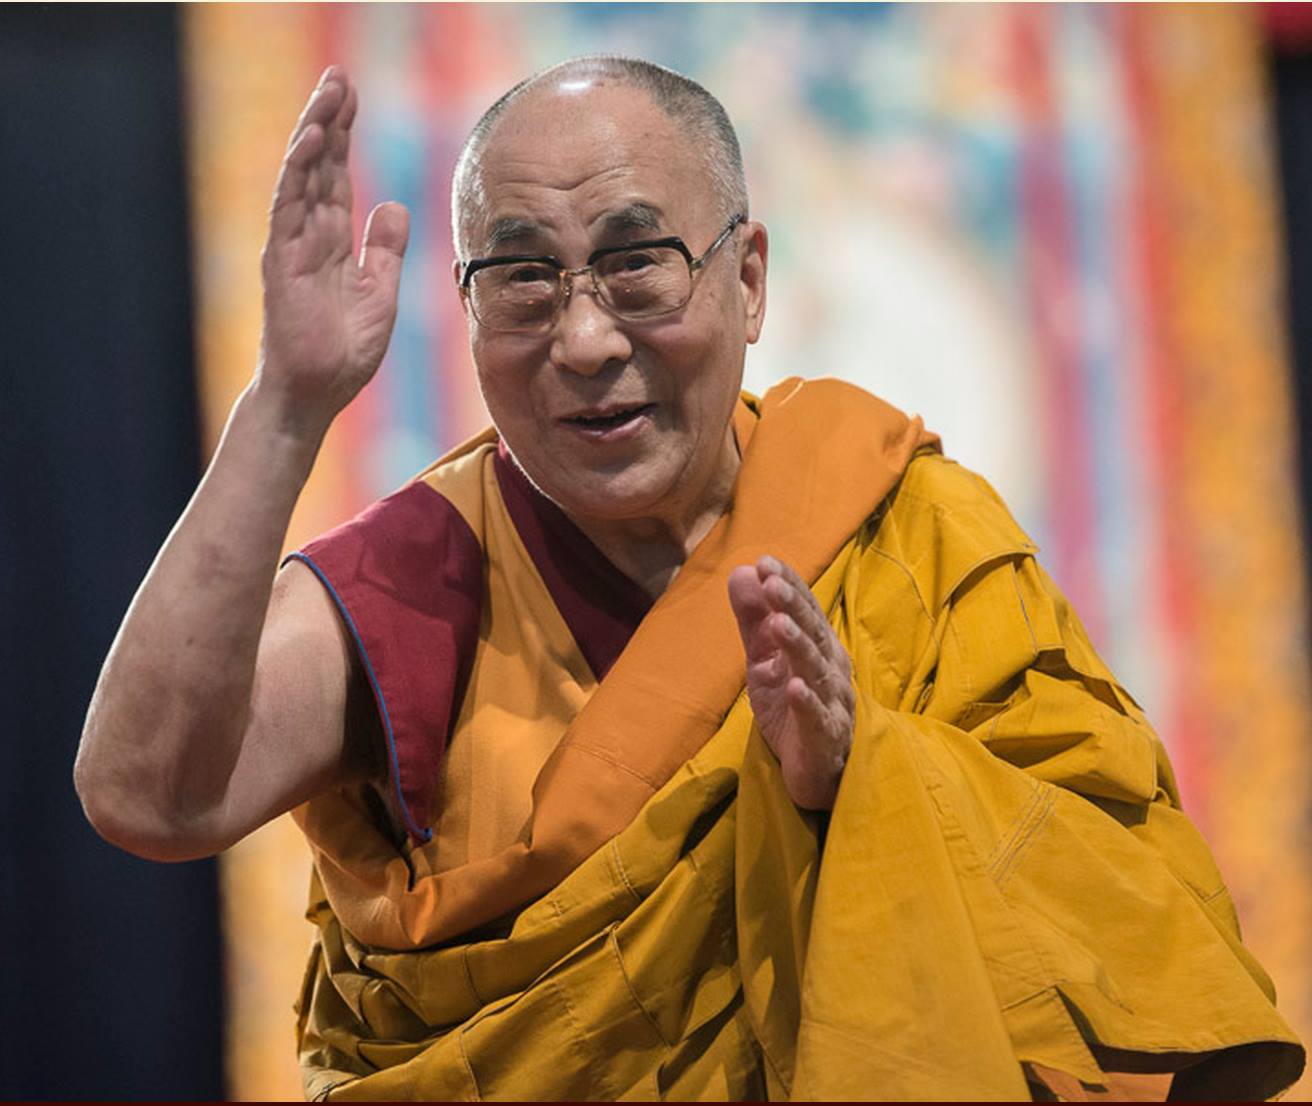 His Holiness the Dalai Lama: The only way in which we can do this is by means of reasoning and analysis.